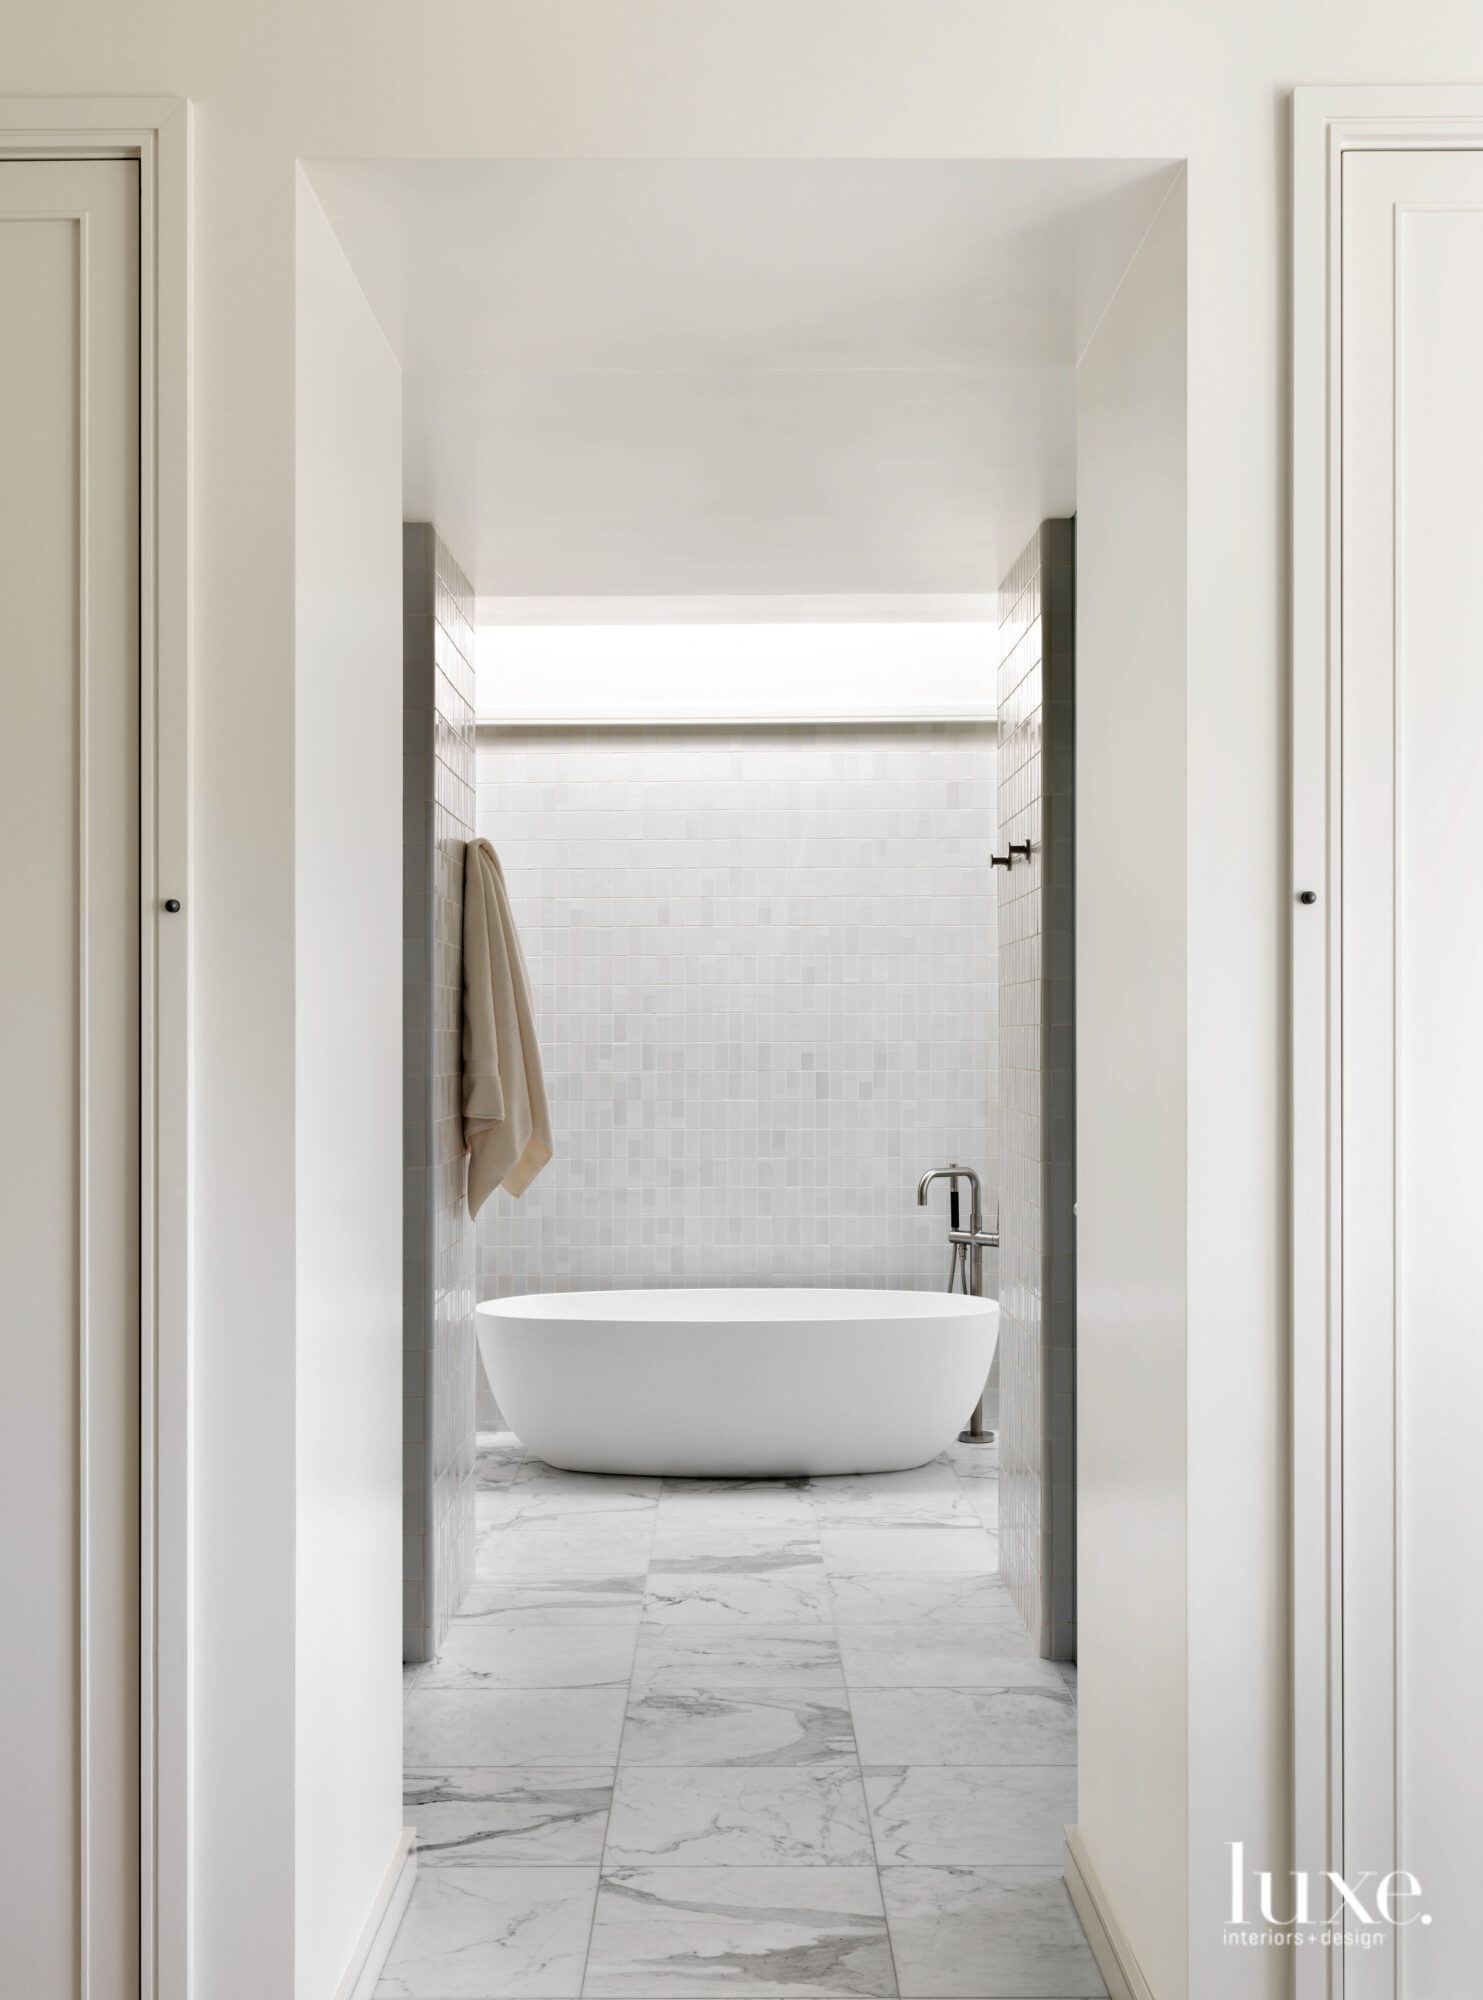 The primary bath is all white tile and stone.